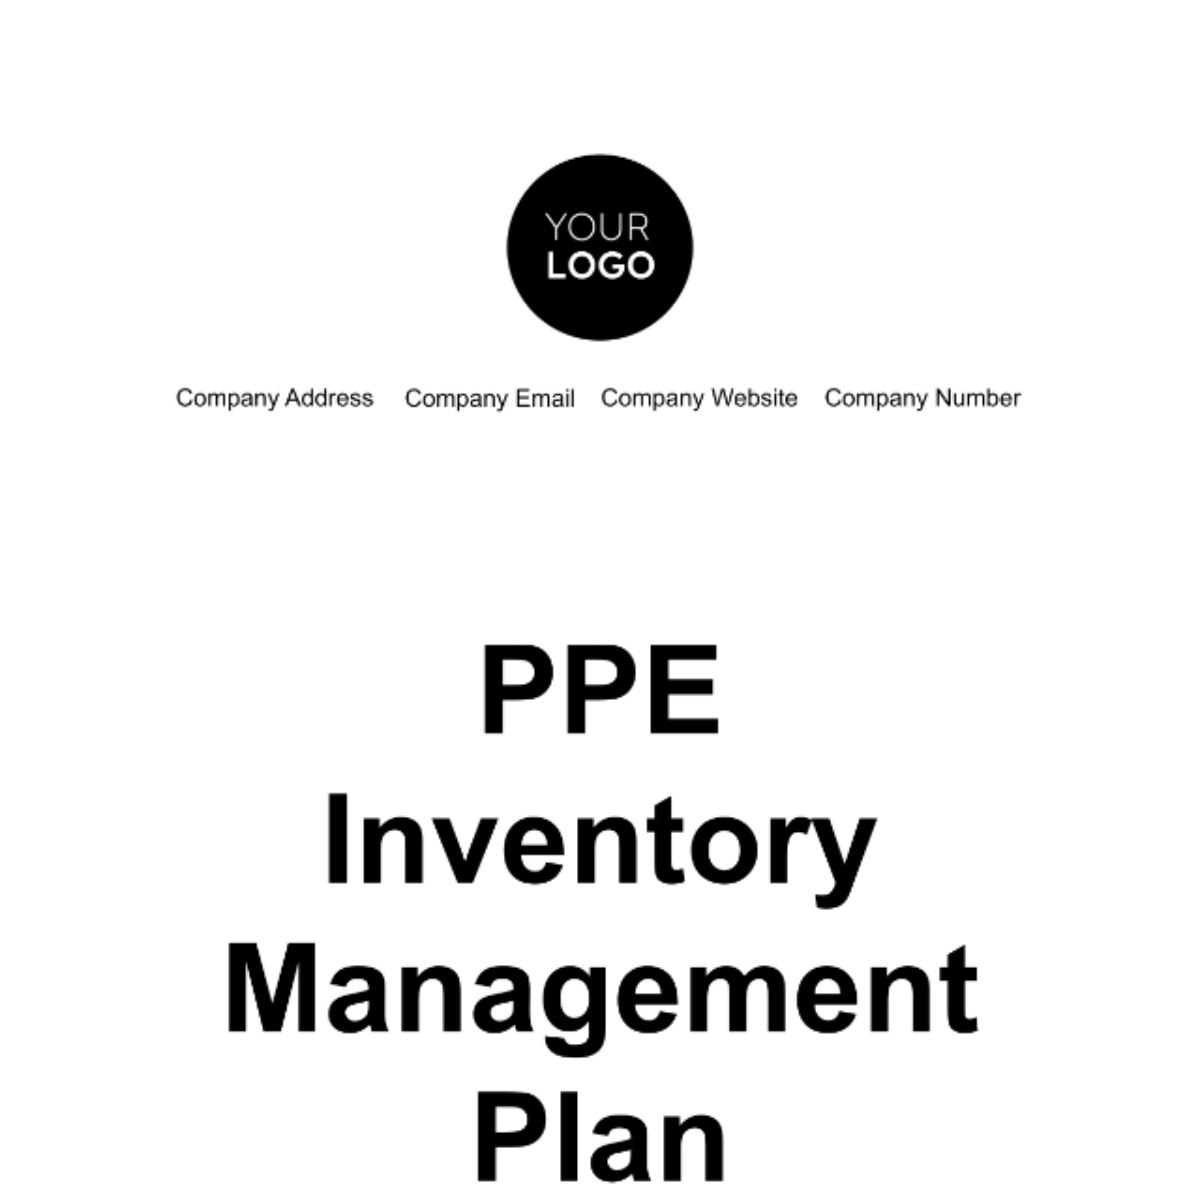 Free PPE Inventory Management Plan Template